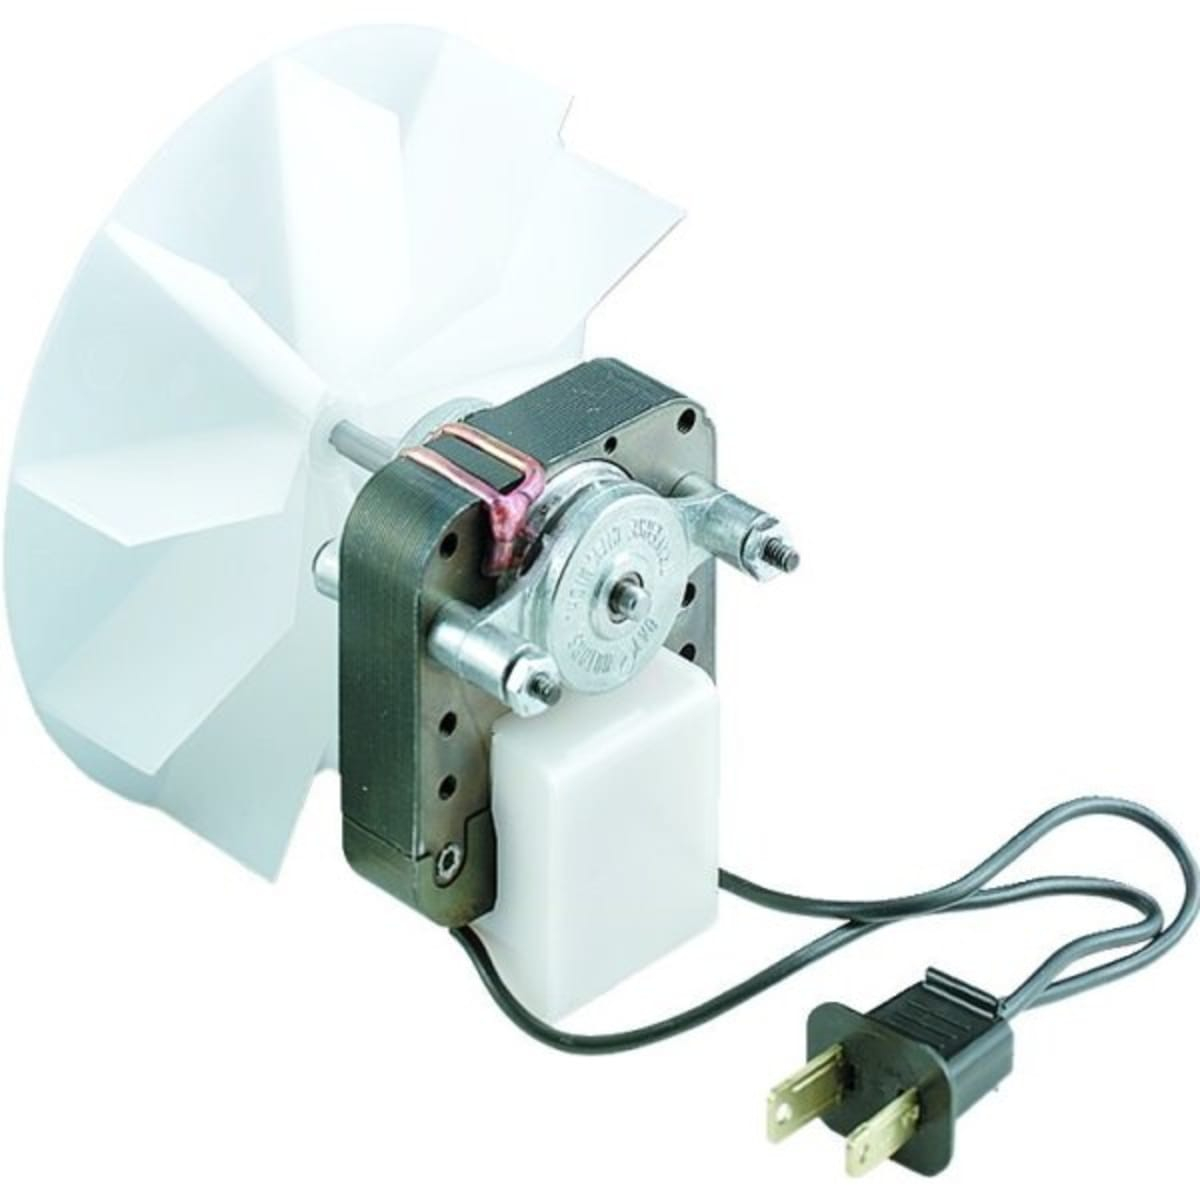 Exhaust Motor And Fan Assembly Package Of 2 Hd Supply In Proportions 1200 X 1200 